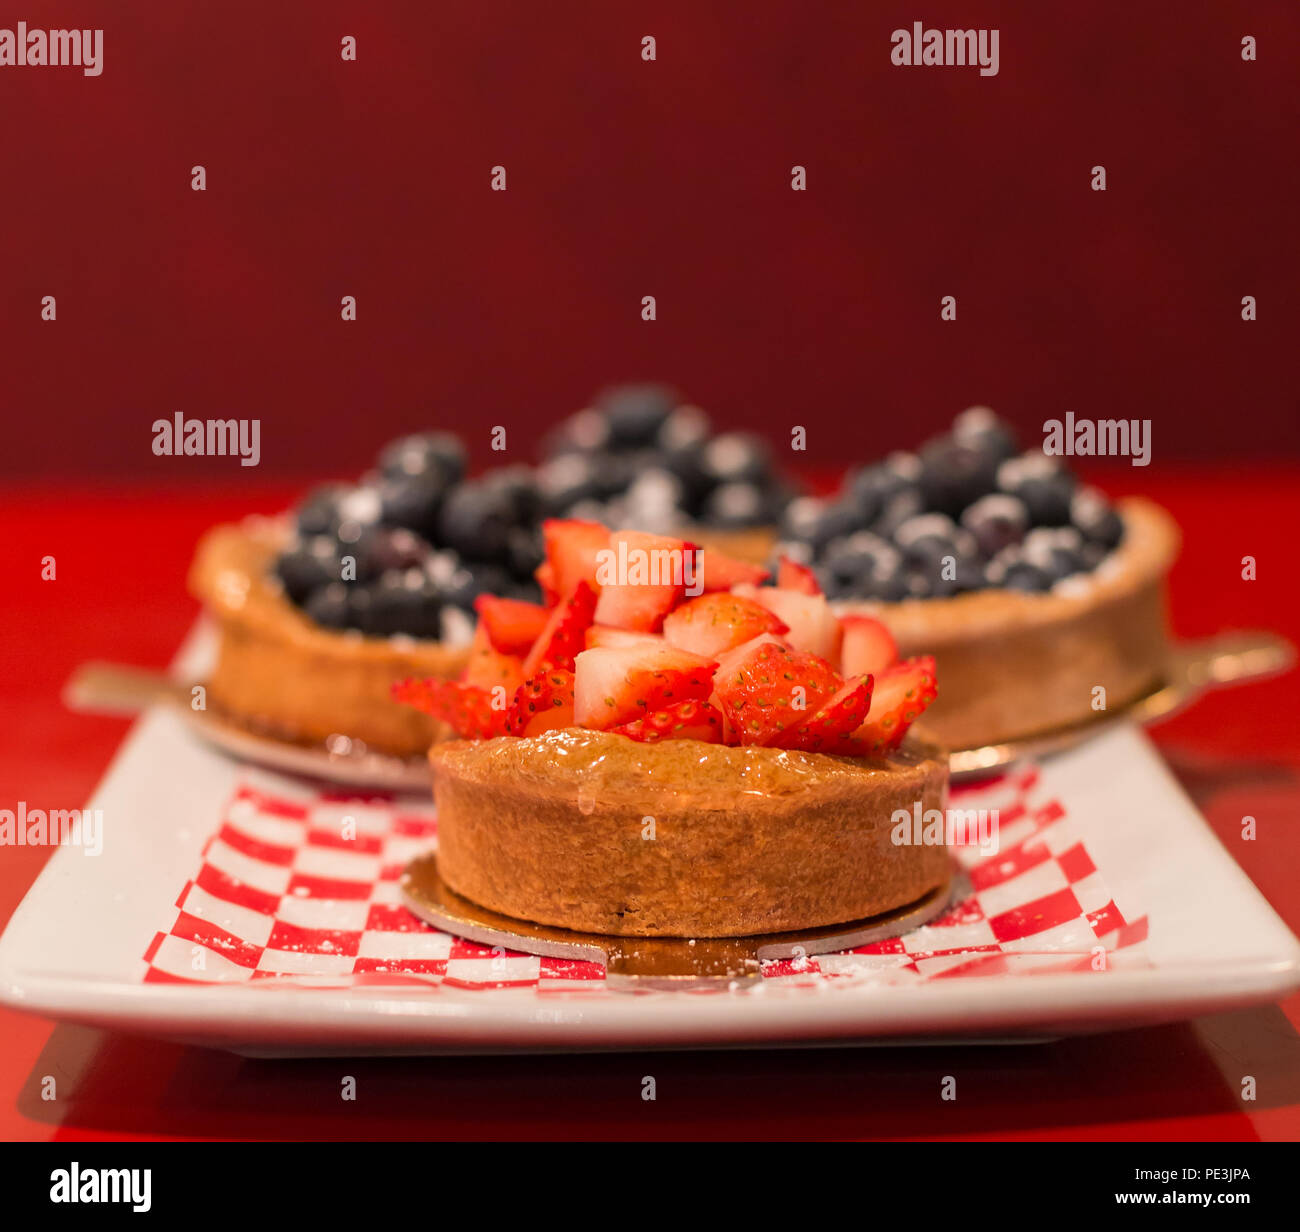 Strawberry tart with blueberry tarts in the background. Stock Photo